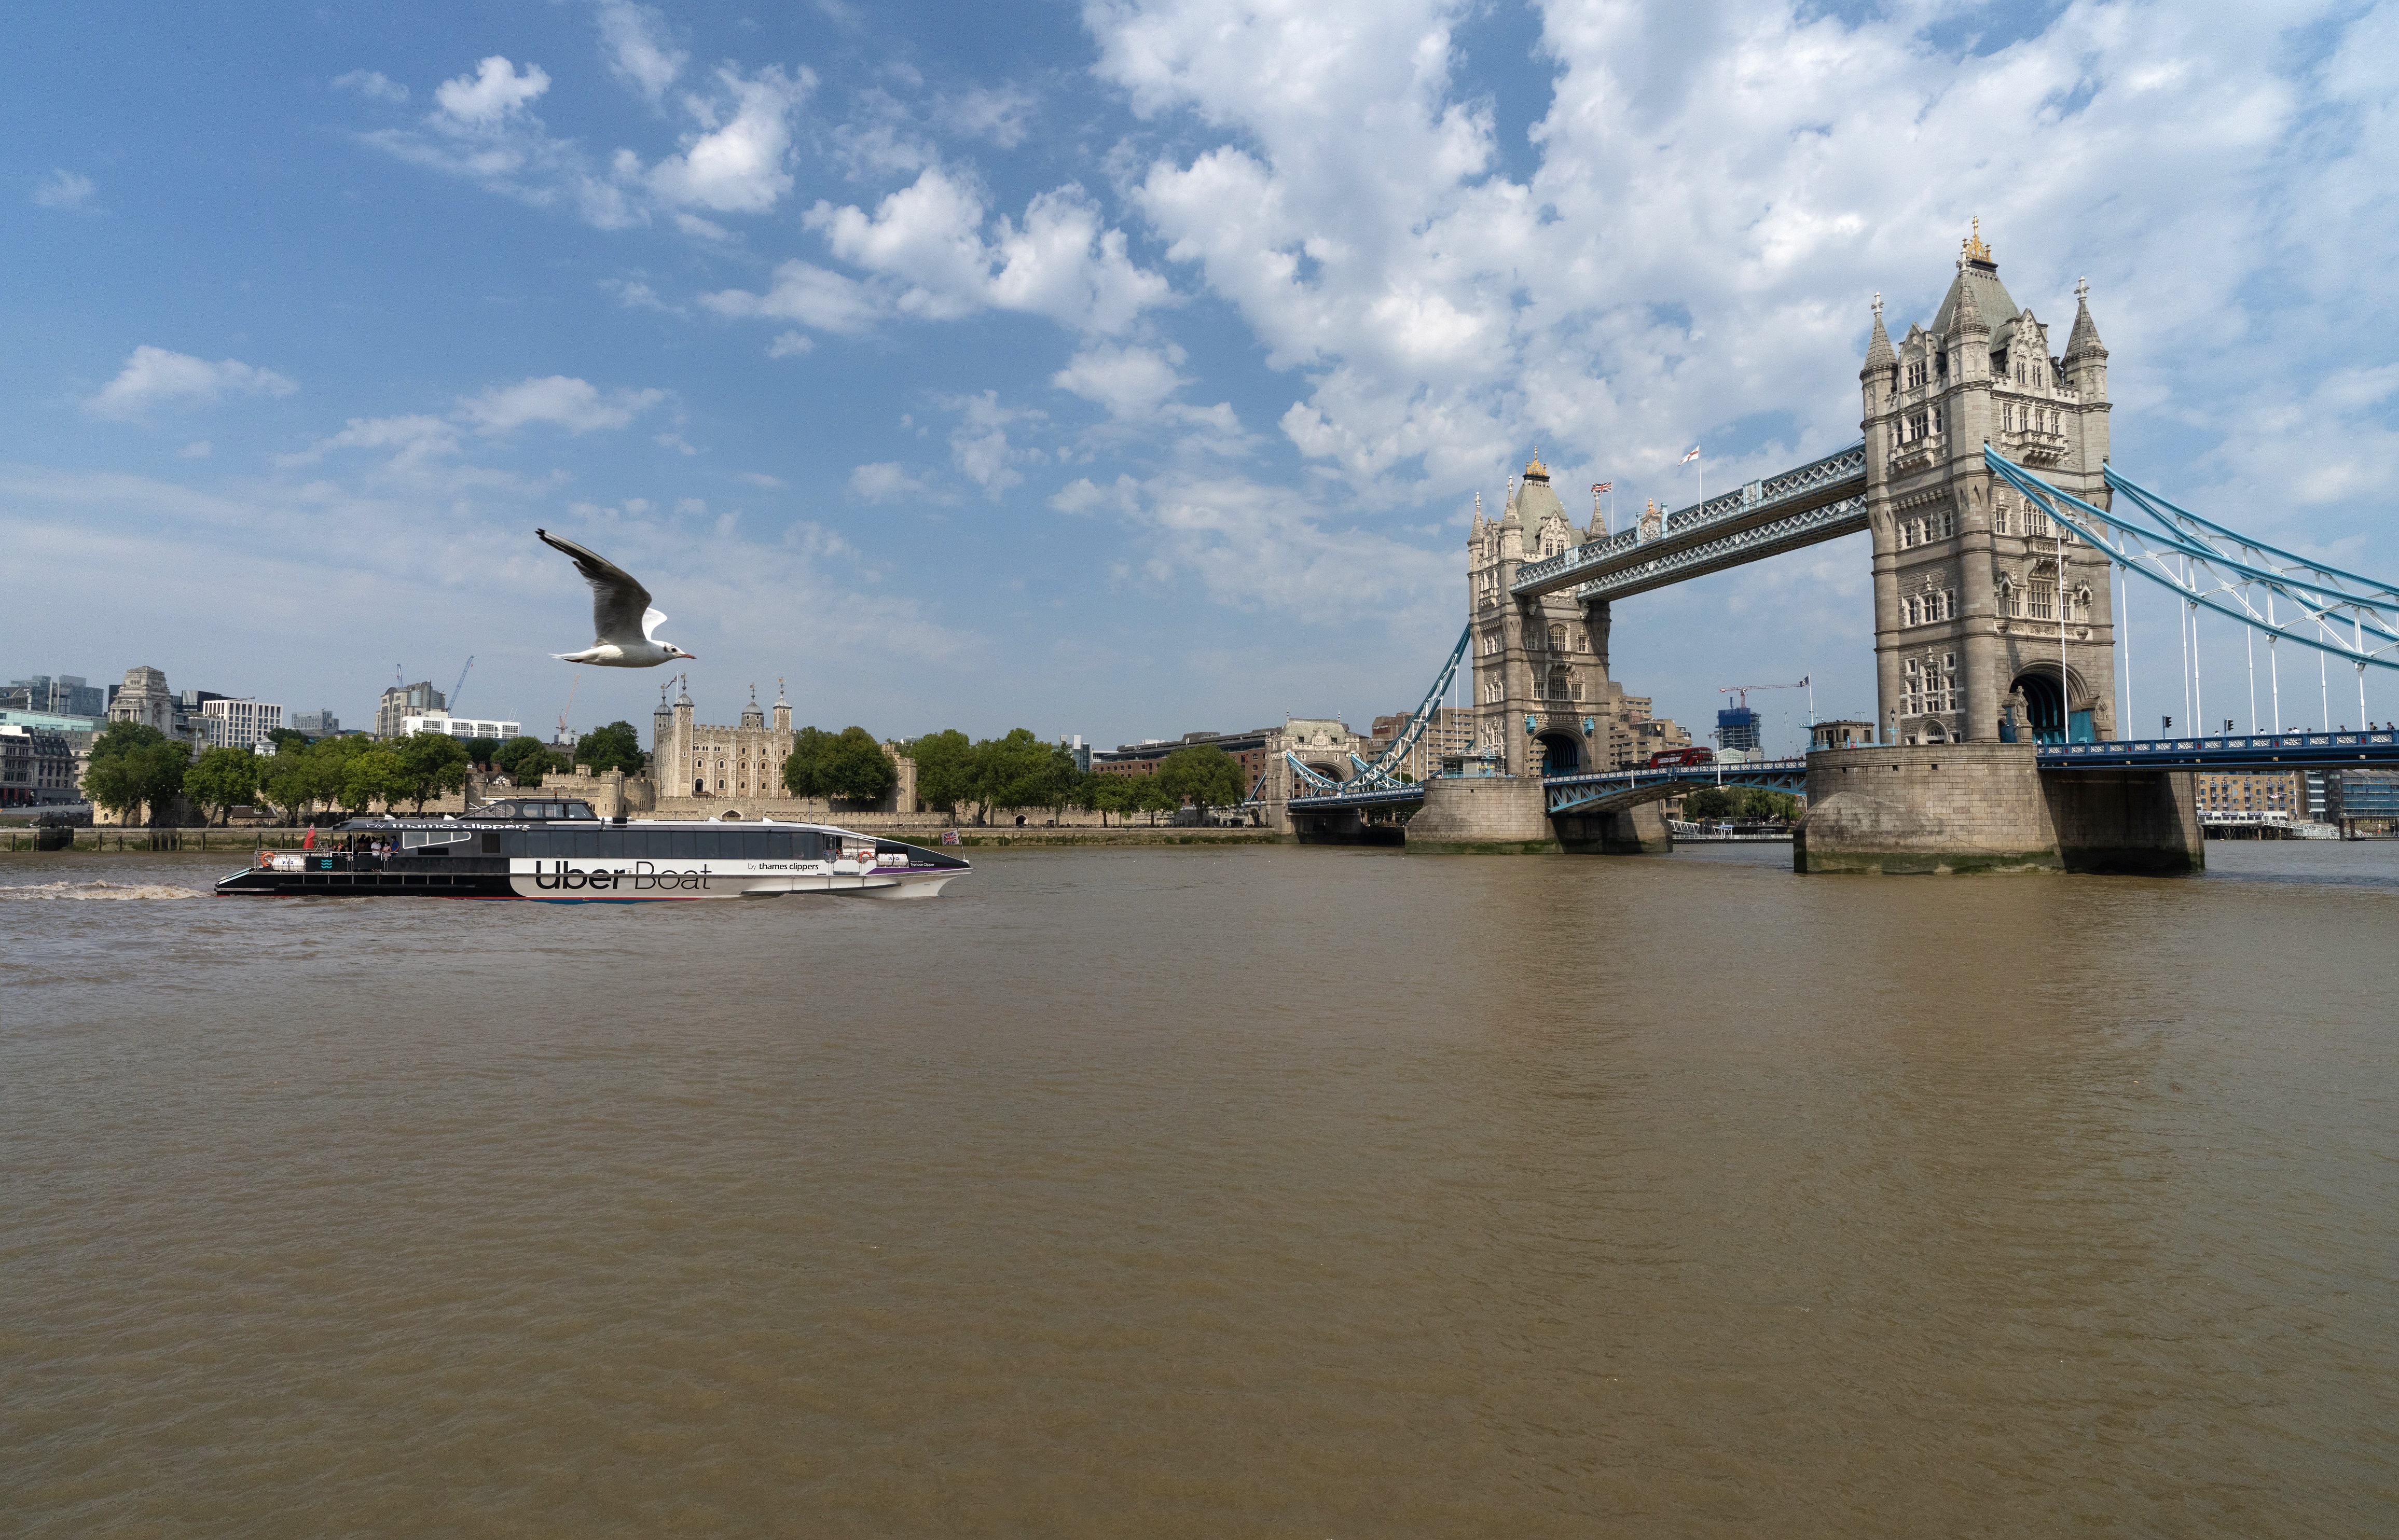 Uber_Boat_by_Thames_Clippers_Tower_Bridge